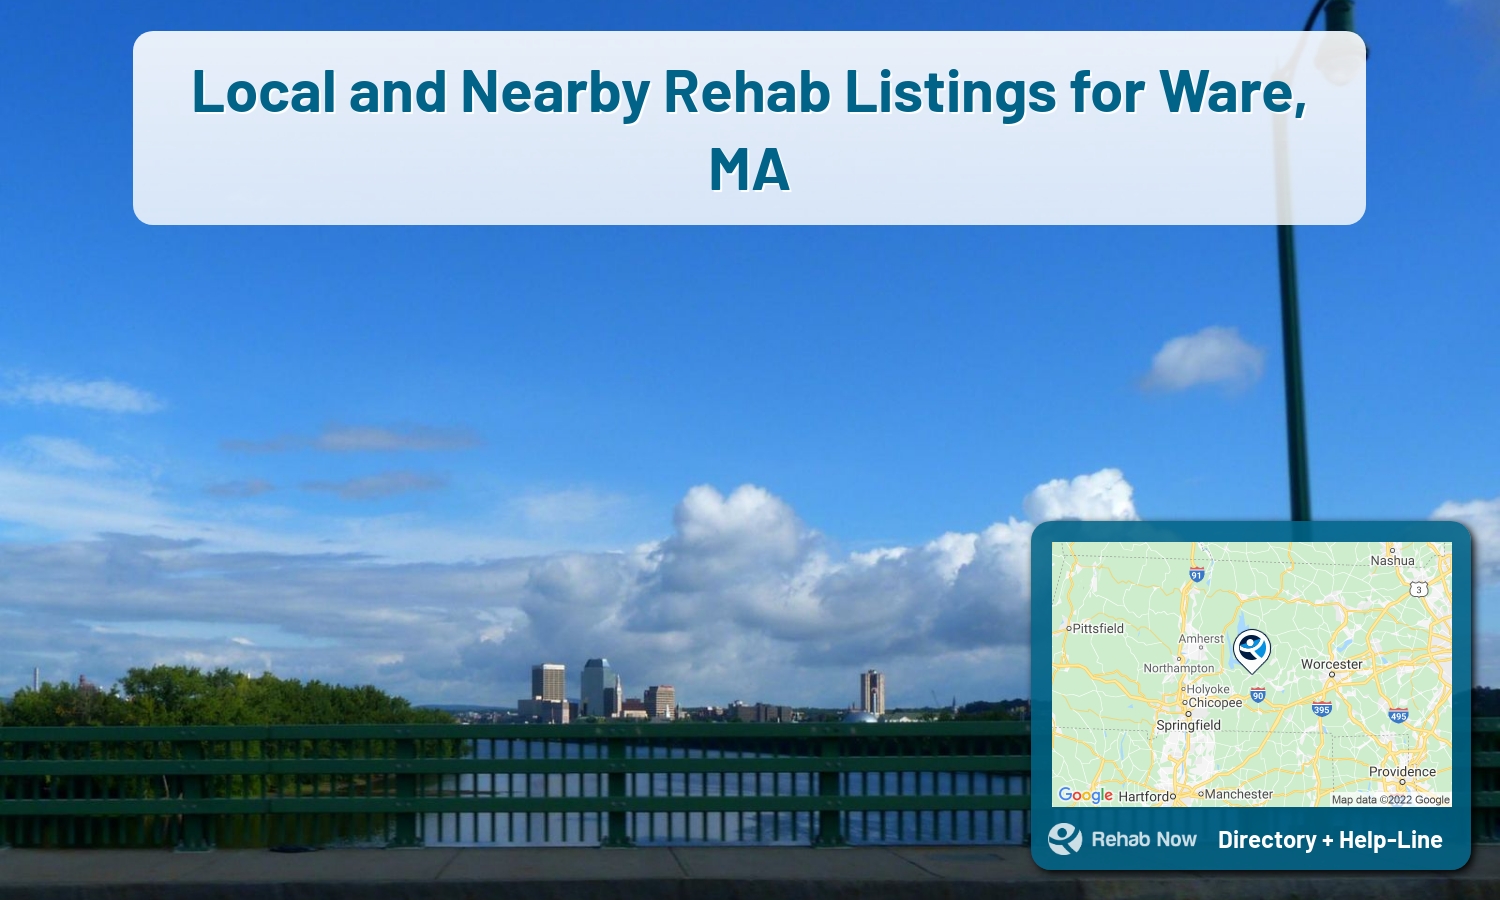 Ware, MA Treatment Centers. Find drug rehab in Ware, Massachusetts, or detox and treatment programs. Get the right help now!